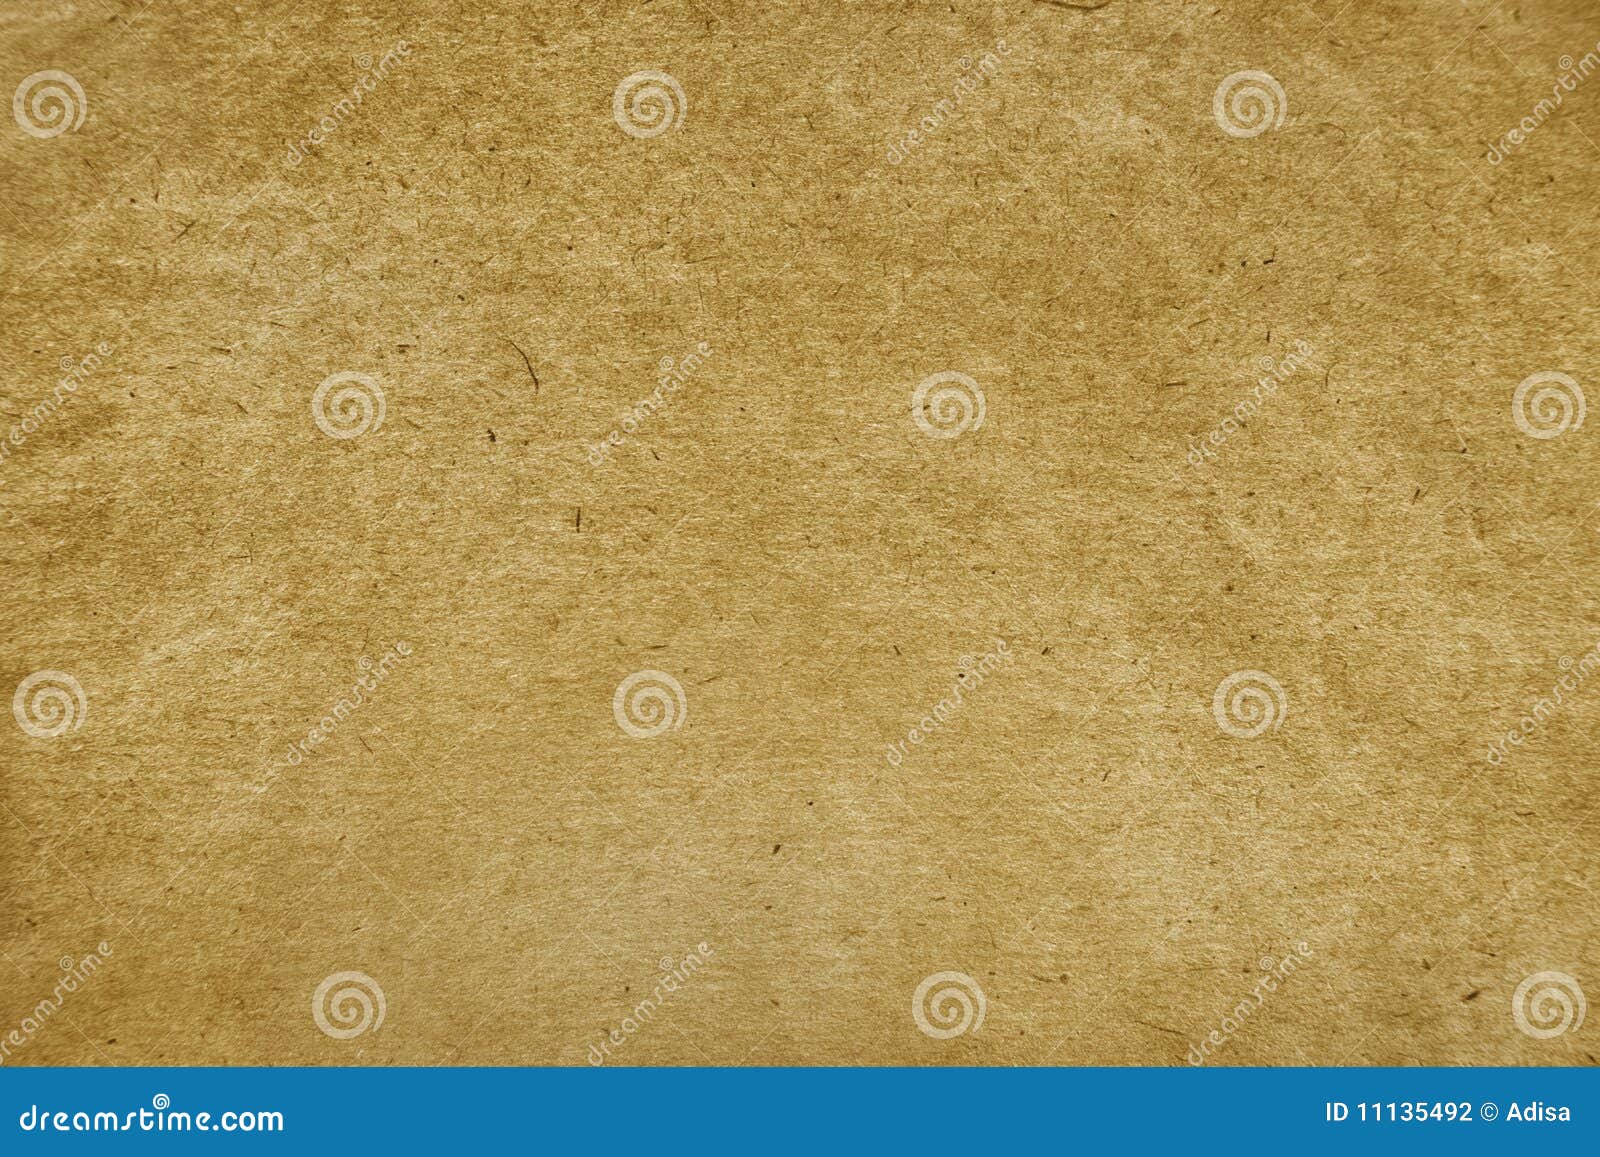 Beautiful Vintage Repeat Patterned Paper Background. Stock Photo - Image of  background, graphic: 106507720